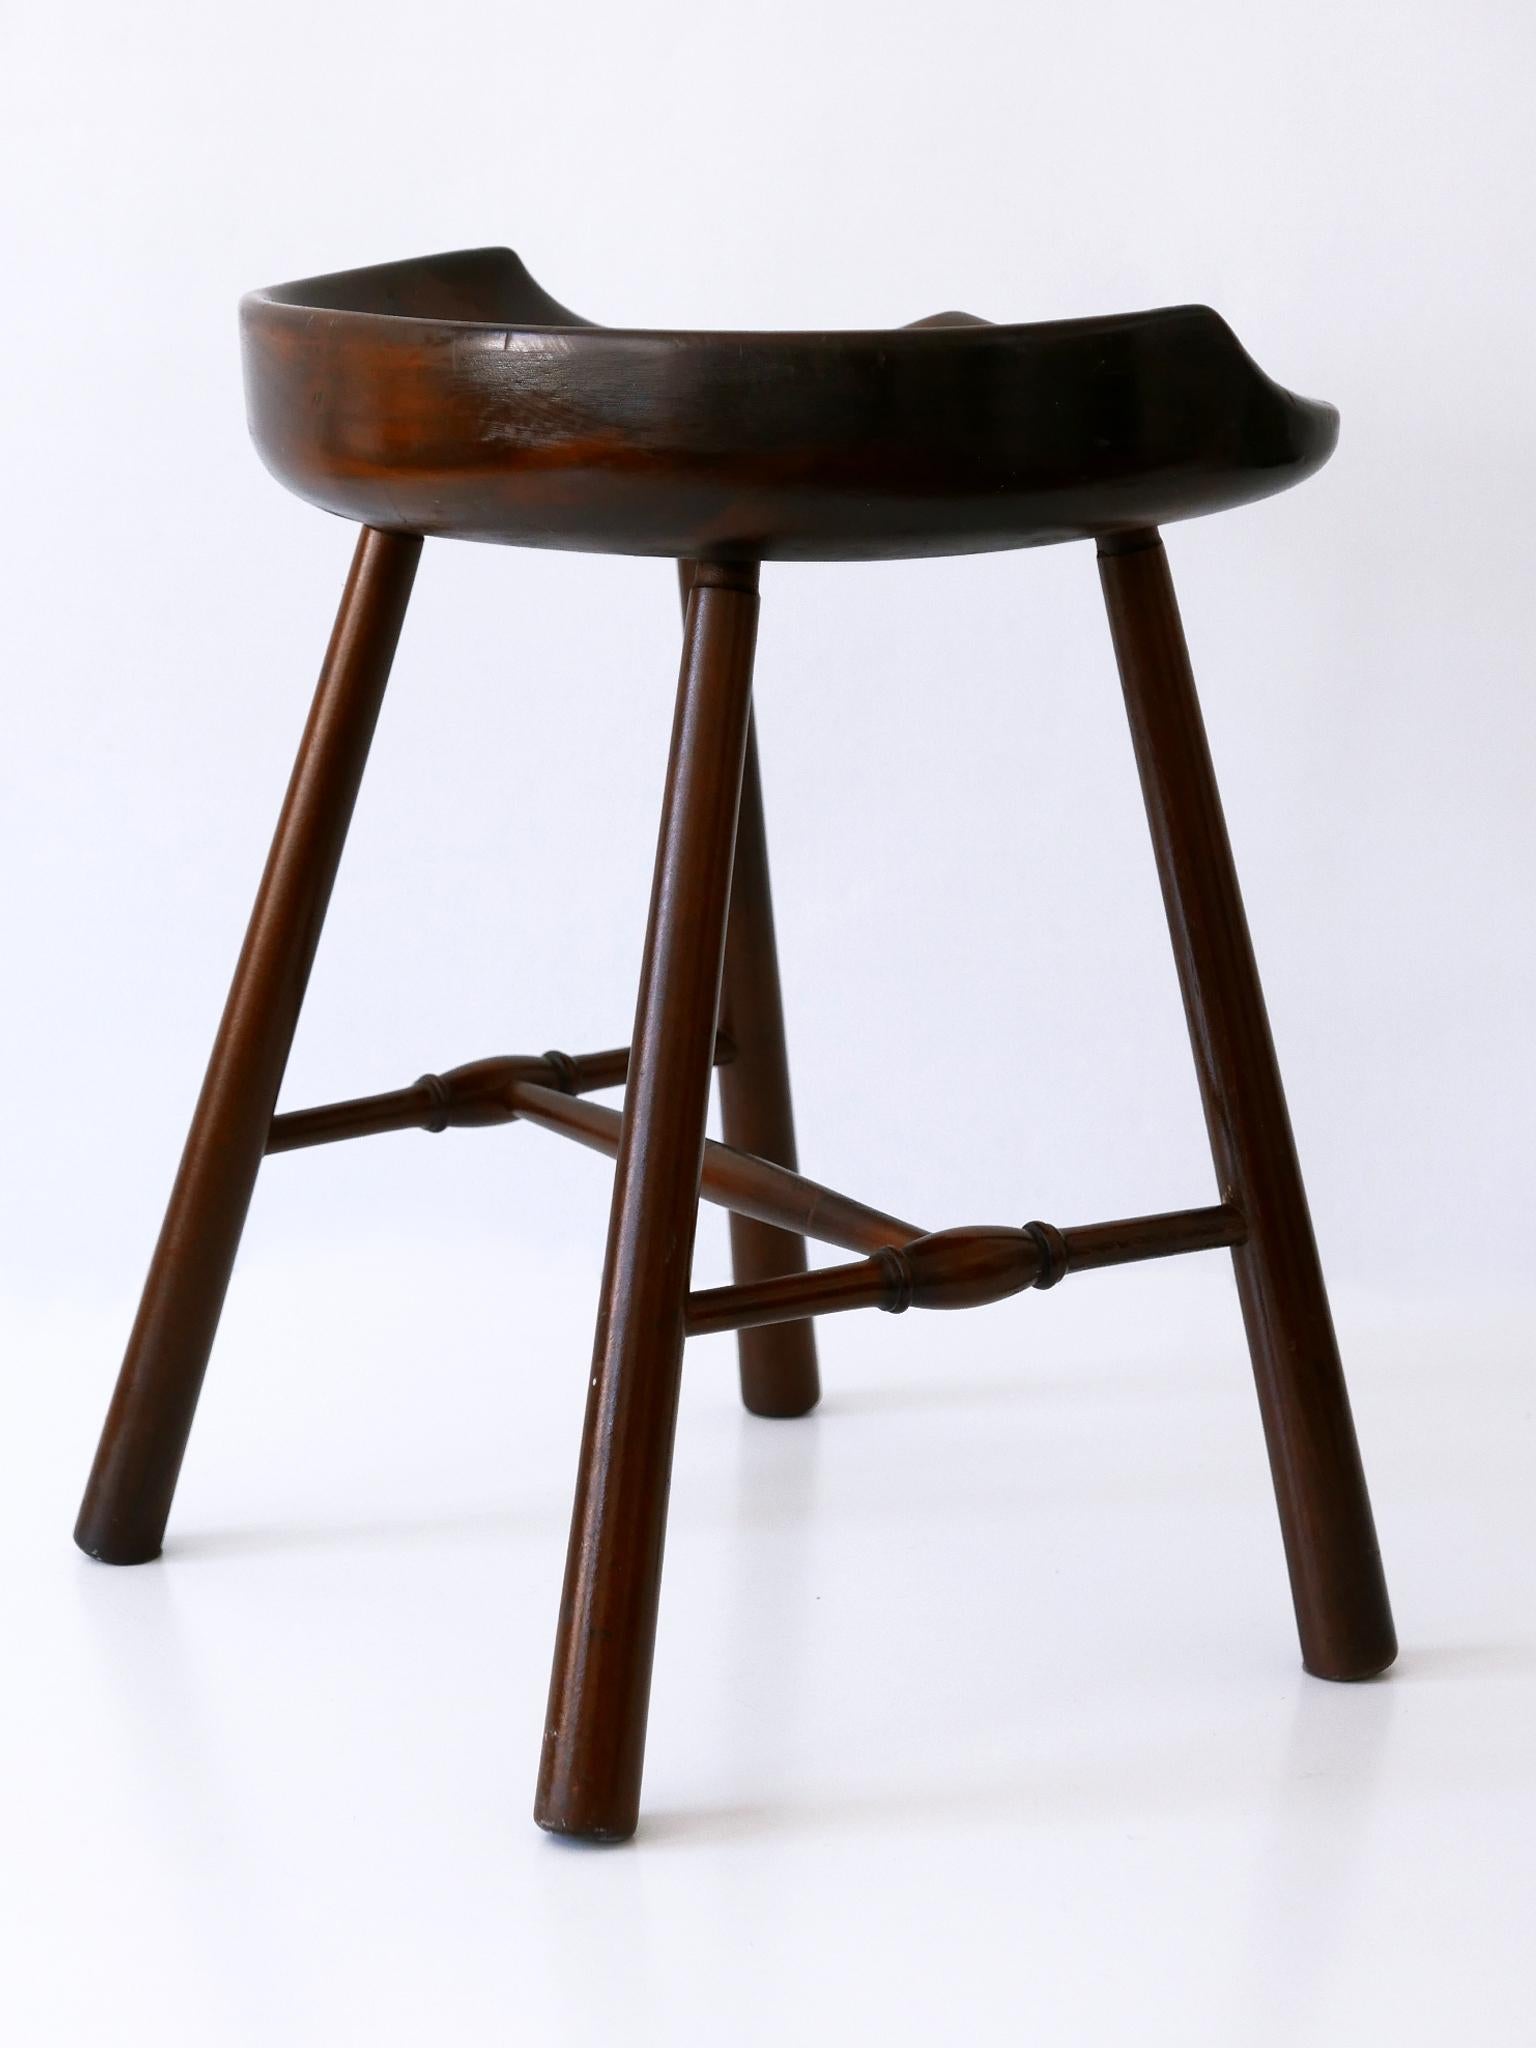 Sculptural Mid-Century Modern Solid Wood Stool Germany 1950s For Sale 6